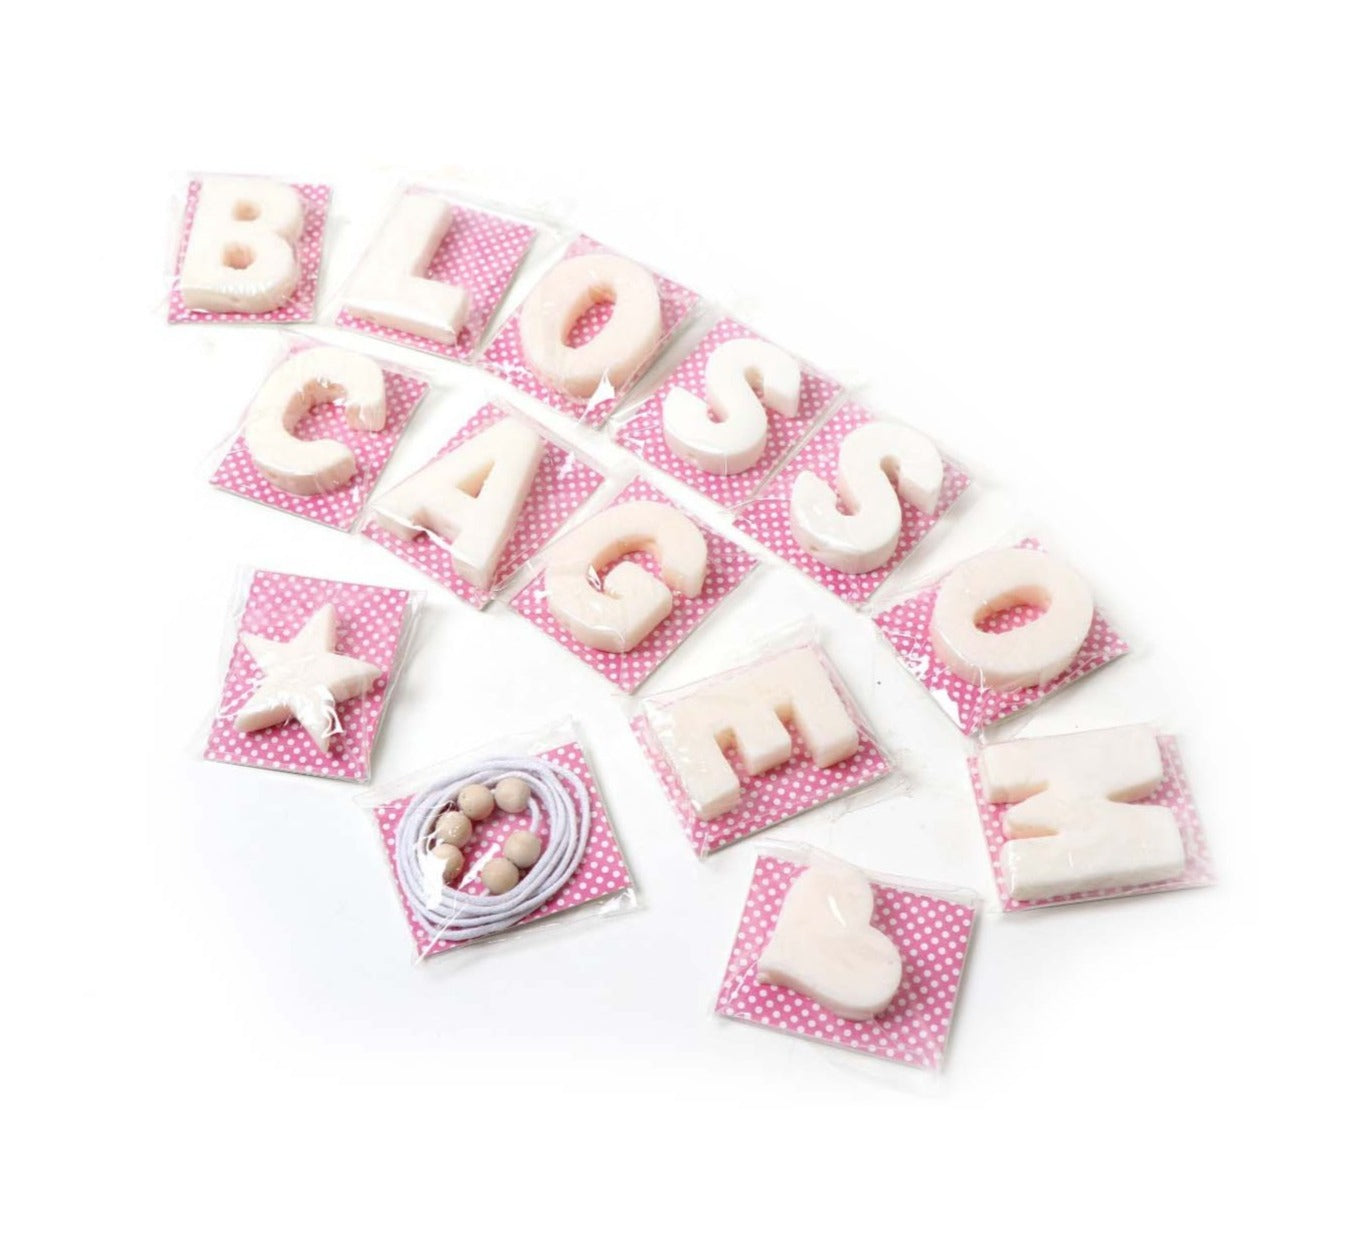 Letter soaps - different styles